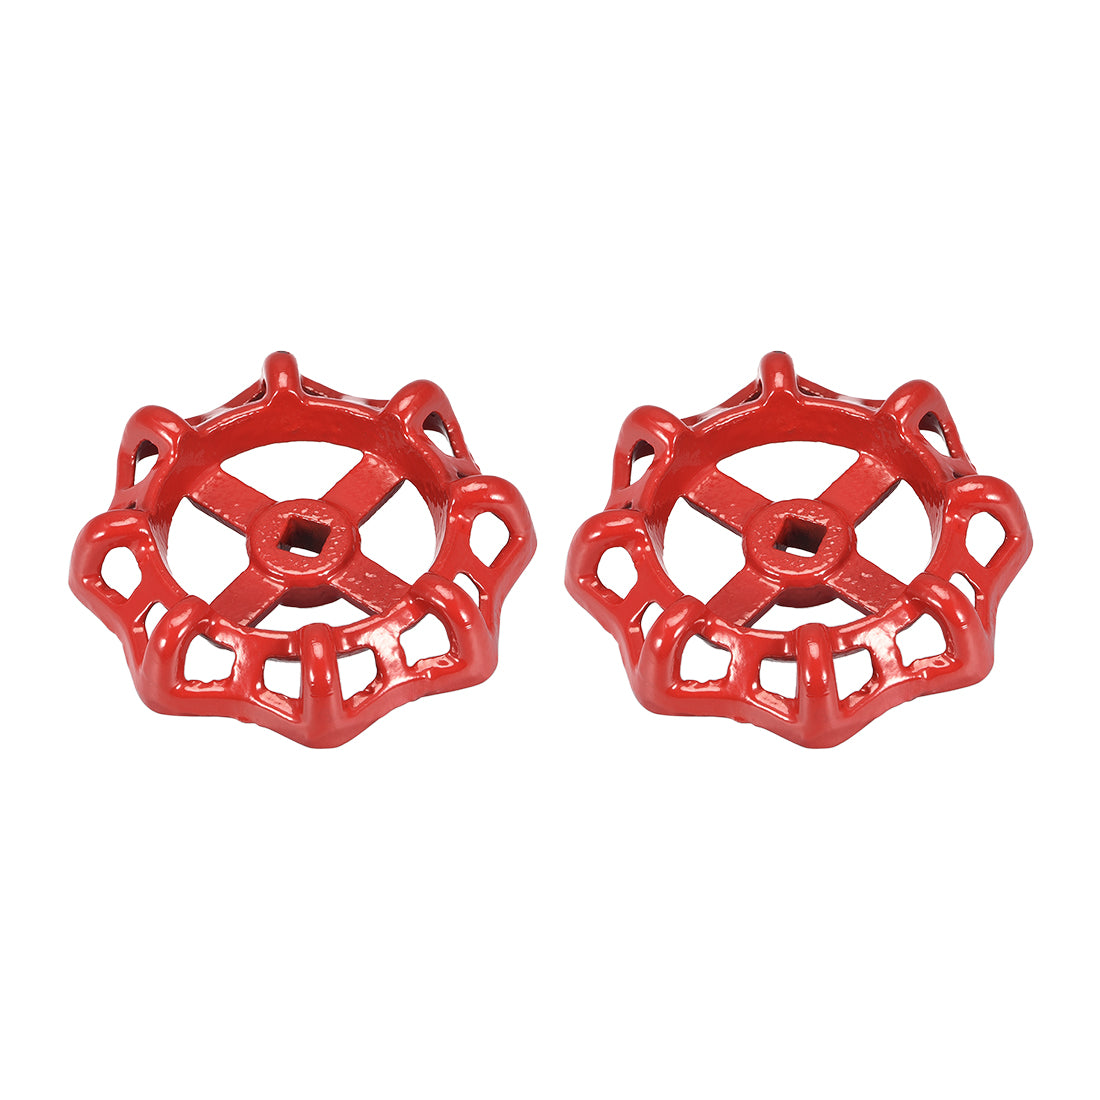 uxcell Uxcell Round Wheel Handle, Square Broach  Paint Cast Steel Red 2Pcs